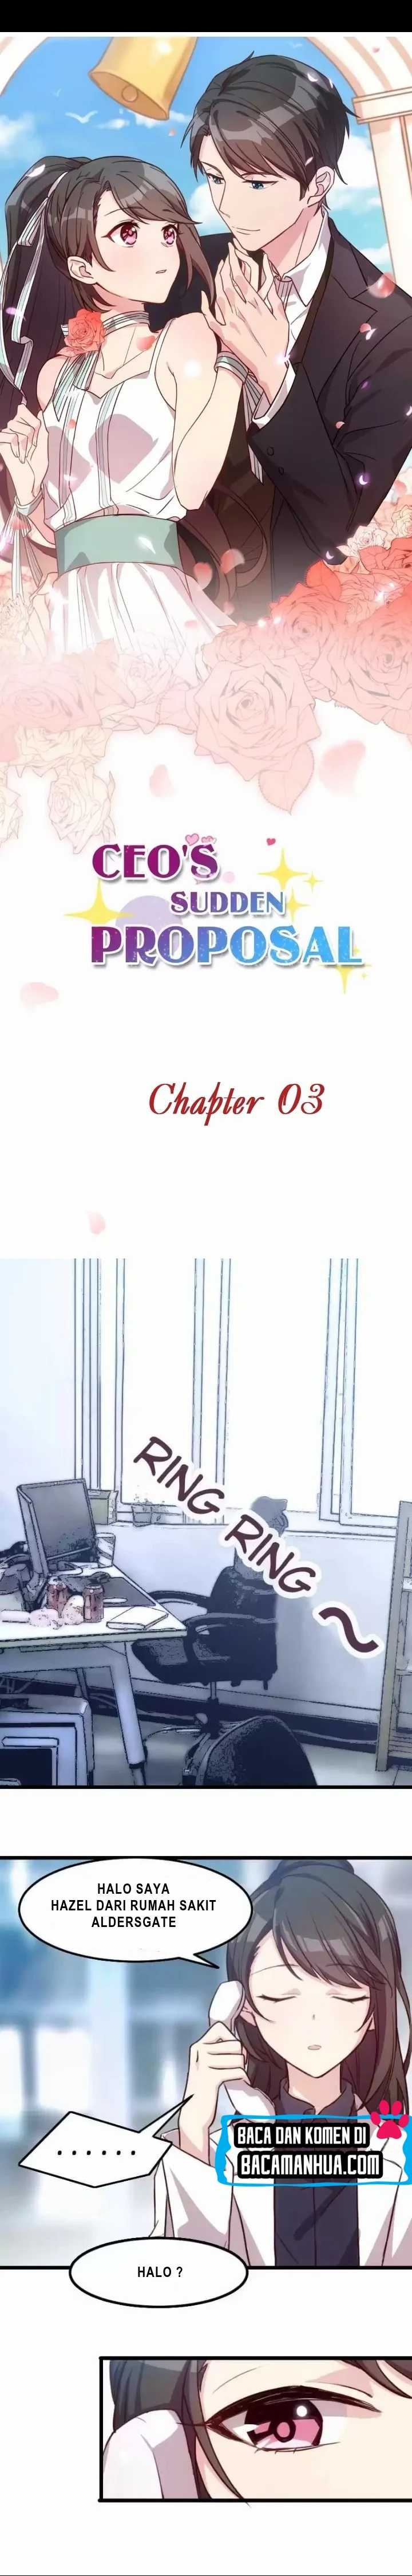 CEO’s Sudden Proposal Chapter 3